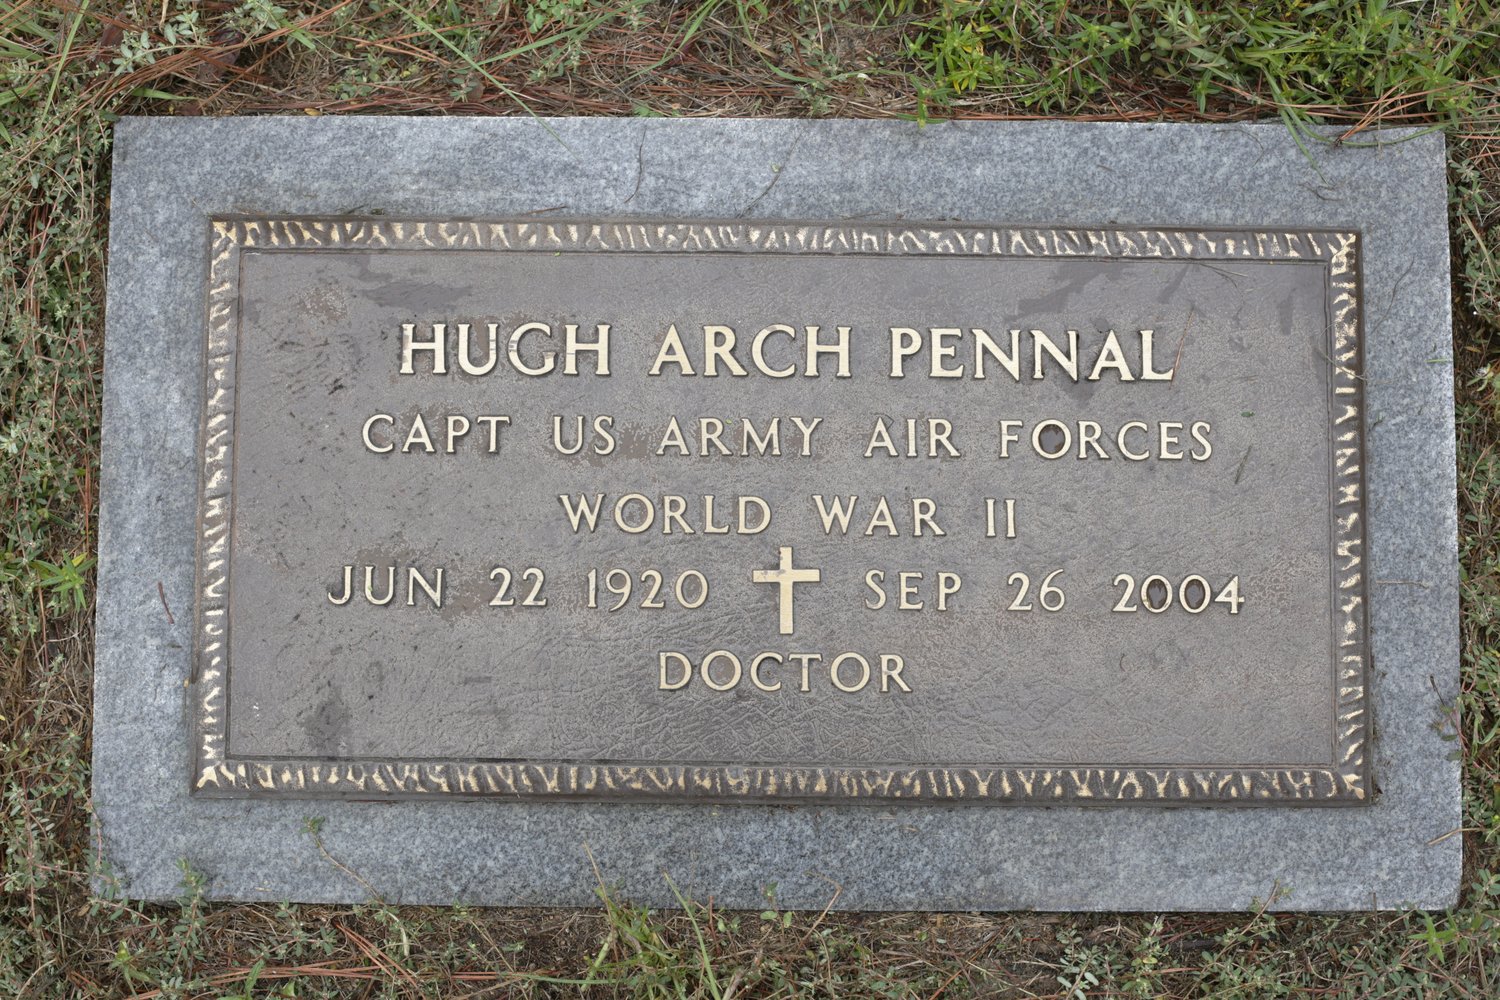 Dr. Pennal’s grave marker in Hawkins Cemetery.